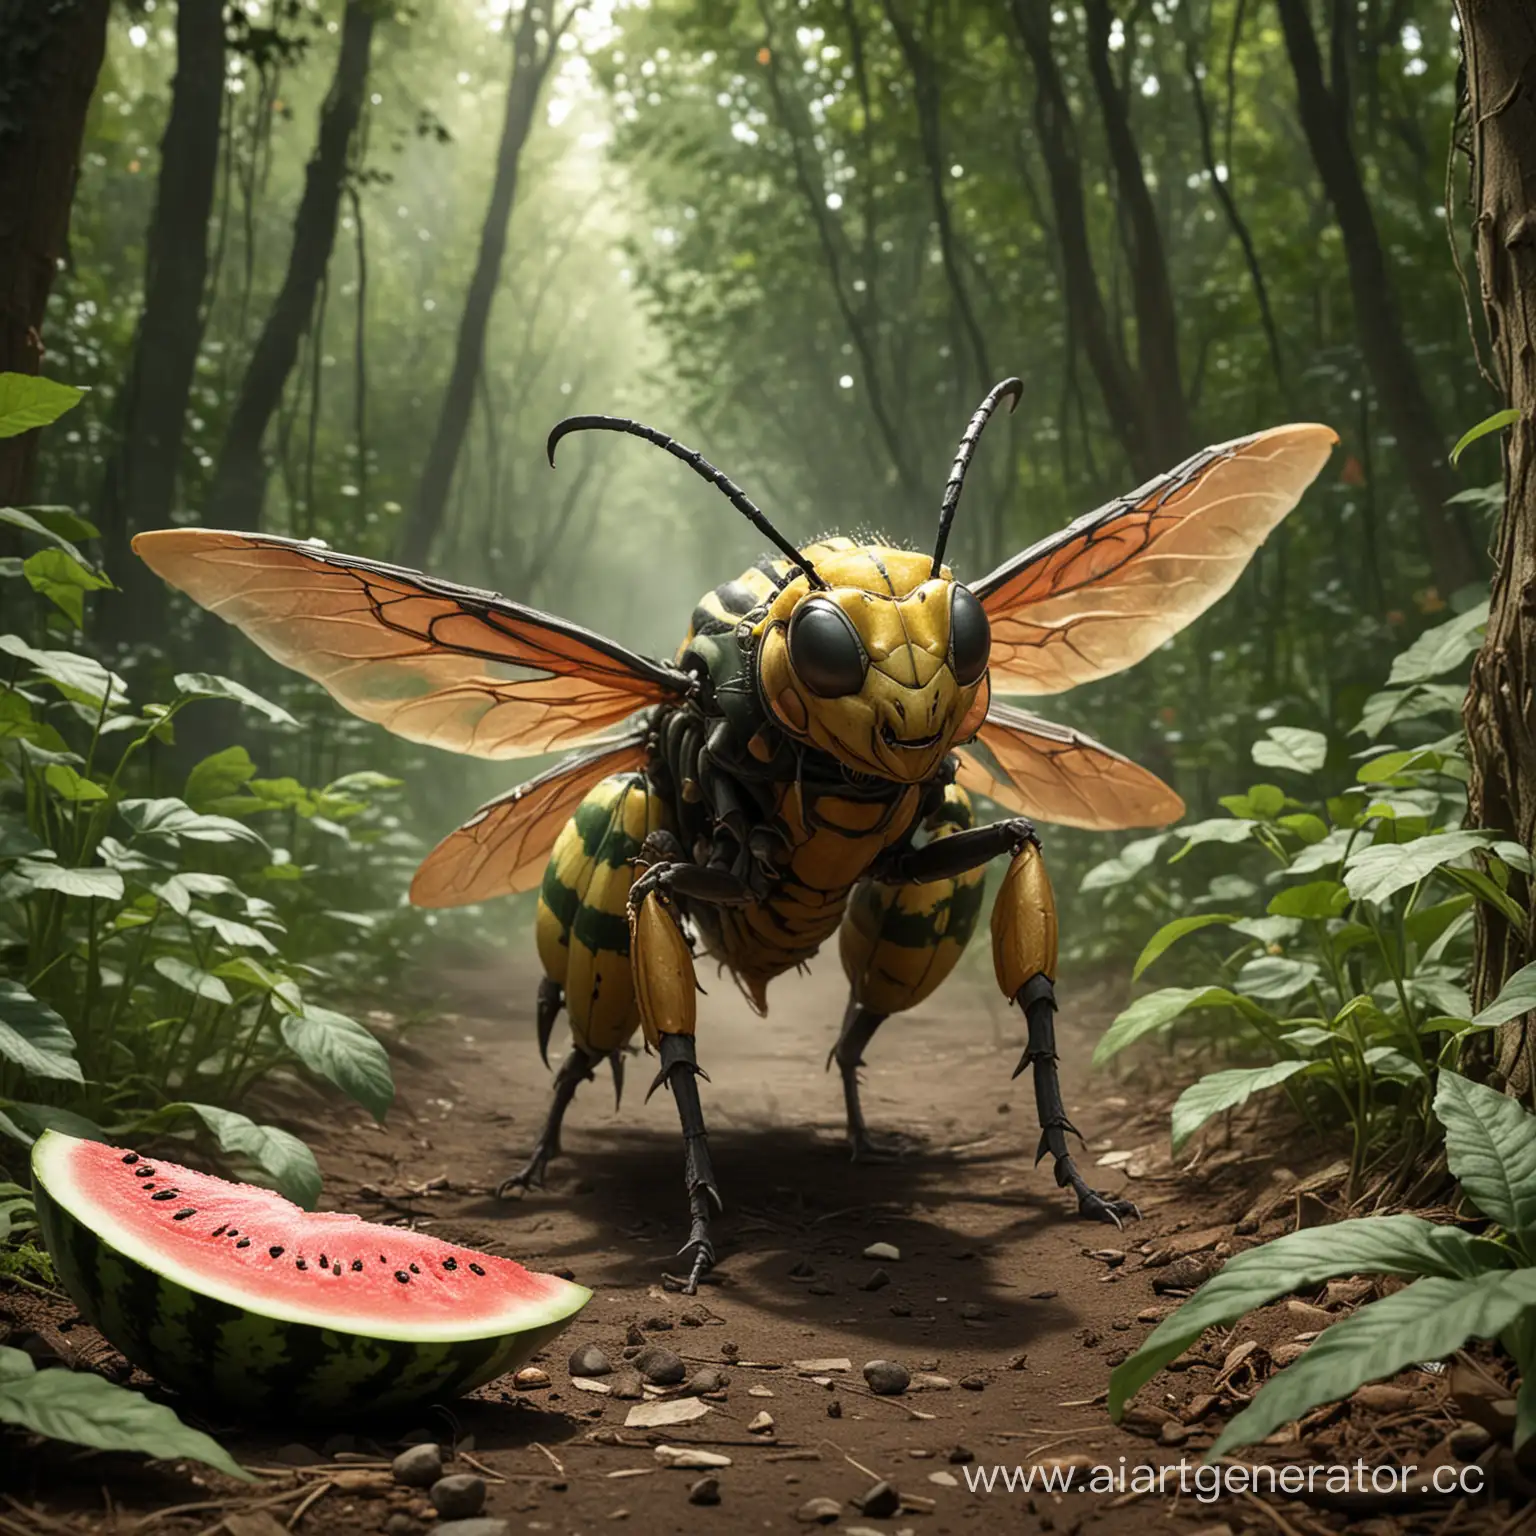 Cursed-Hornet-Roaming-Forests-and-Parks-in-Pursuit-of-Revenge-and-Watermelon